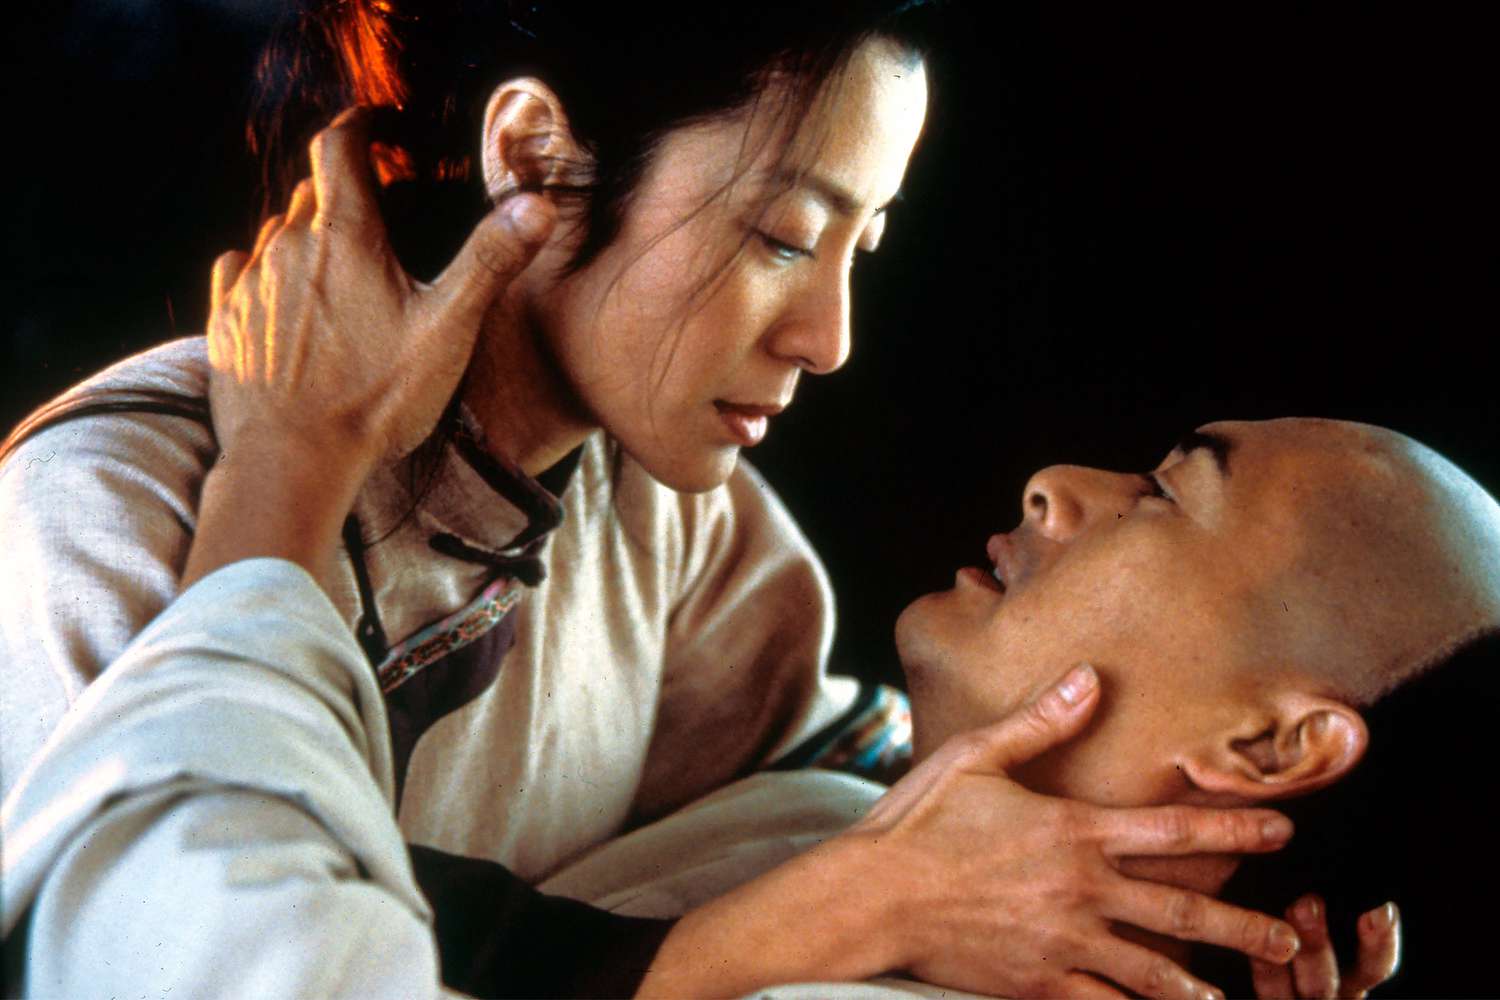 Editorial use only. No book cover usage. Mandatory Credit: Photo by Moviestore/Shutterstock (1551790a) Crouching Tiger Hidden Dragon, Michelle Yeoh, Chow Yun Fat Film and Television